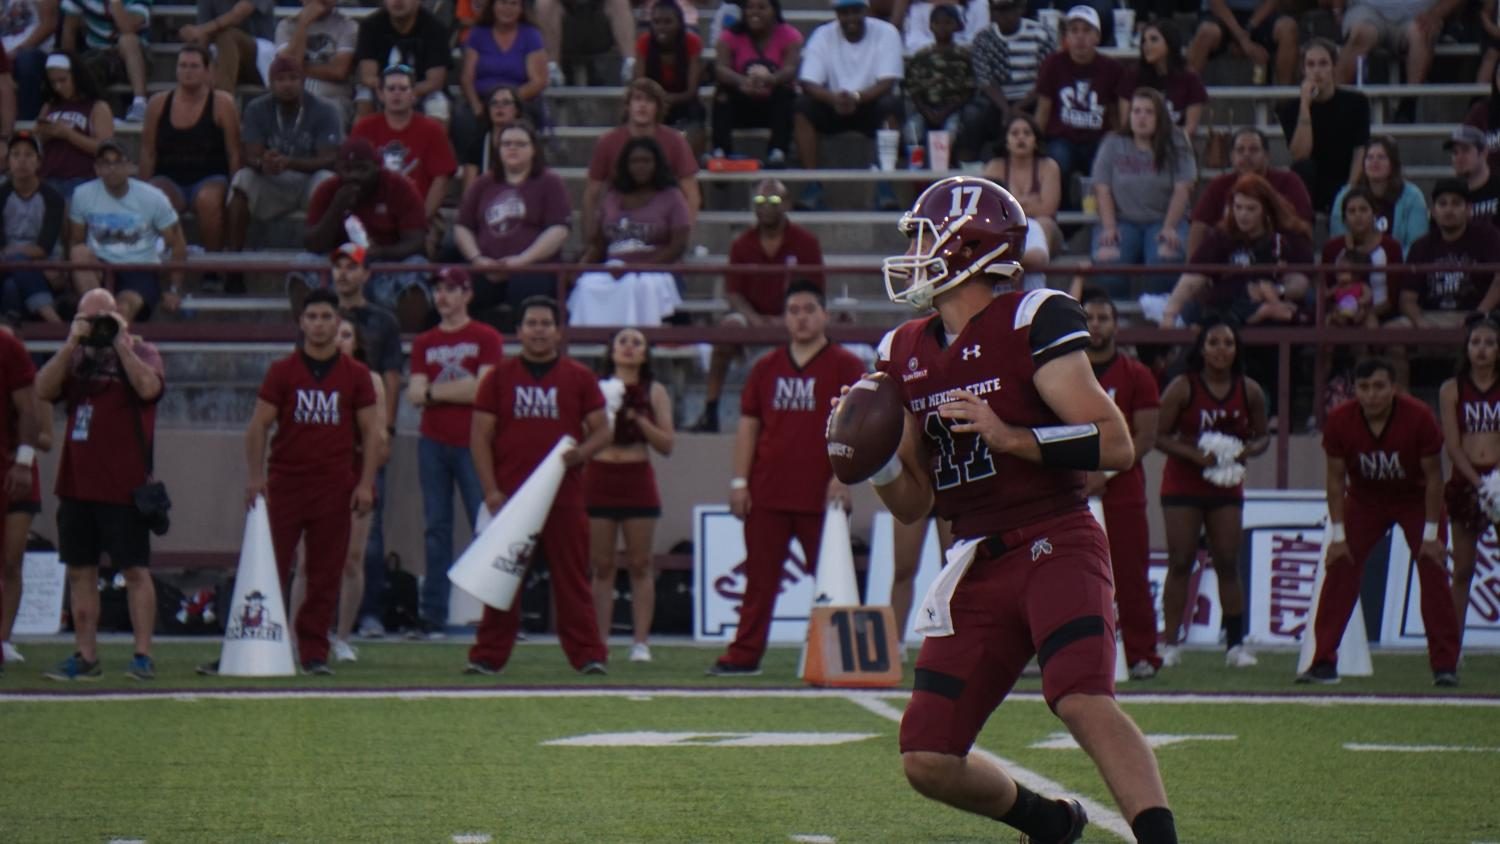 Quarterback Tyler Rogers and the Aggies look to get their first conference win of the season against Georgia Southern.